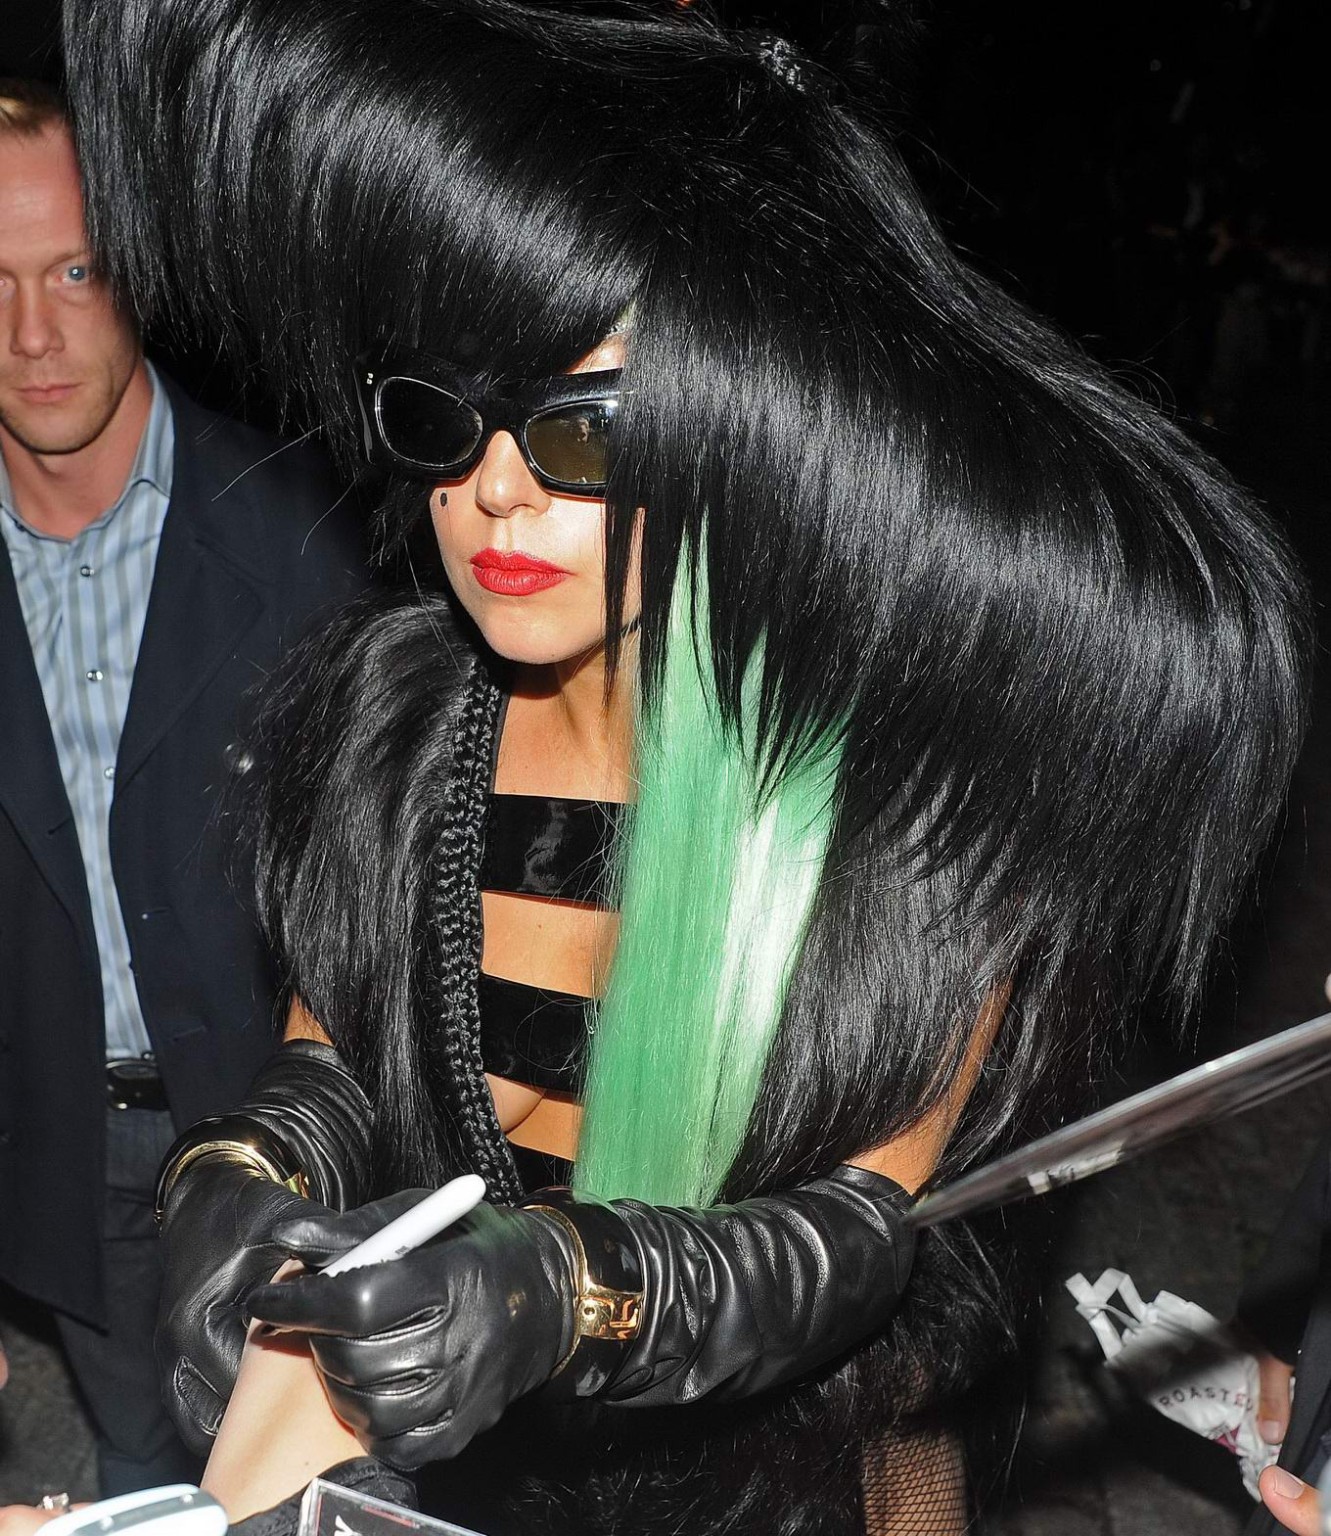 Lady Gaga sighting in London wearing skimpy outfit #75286138